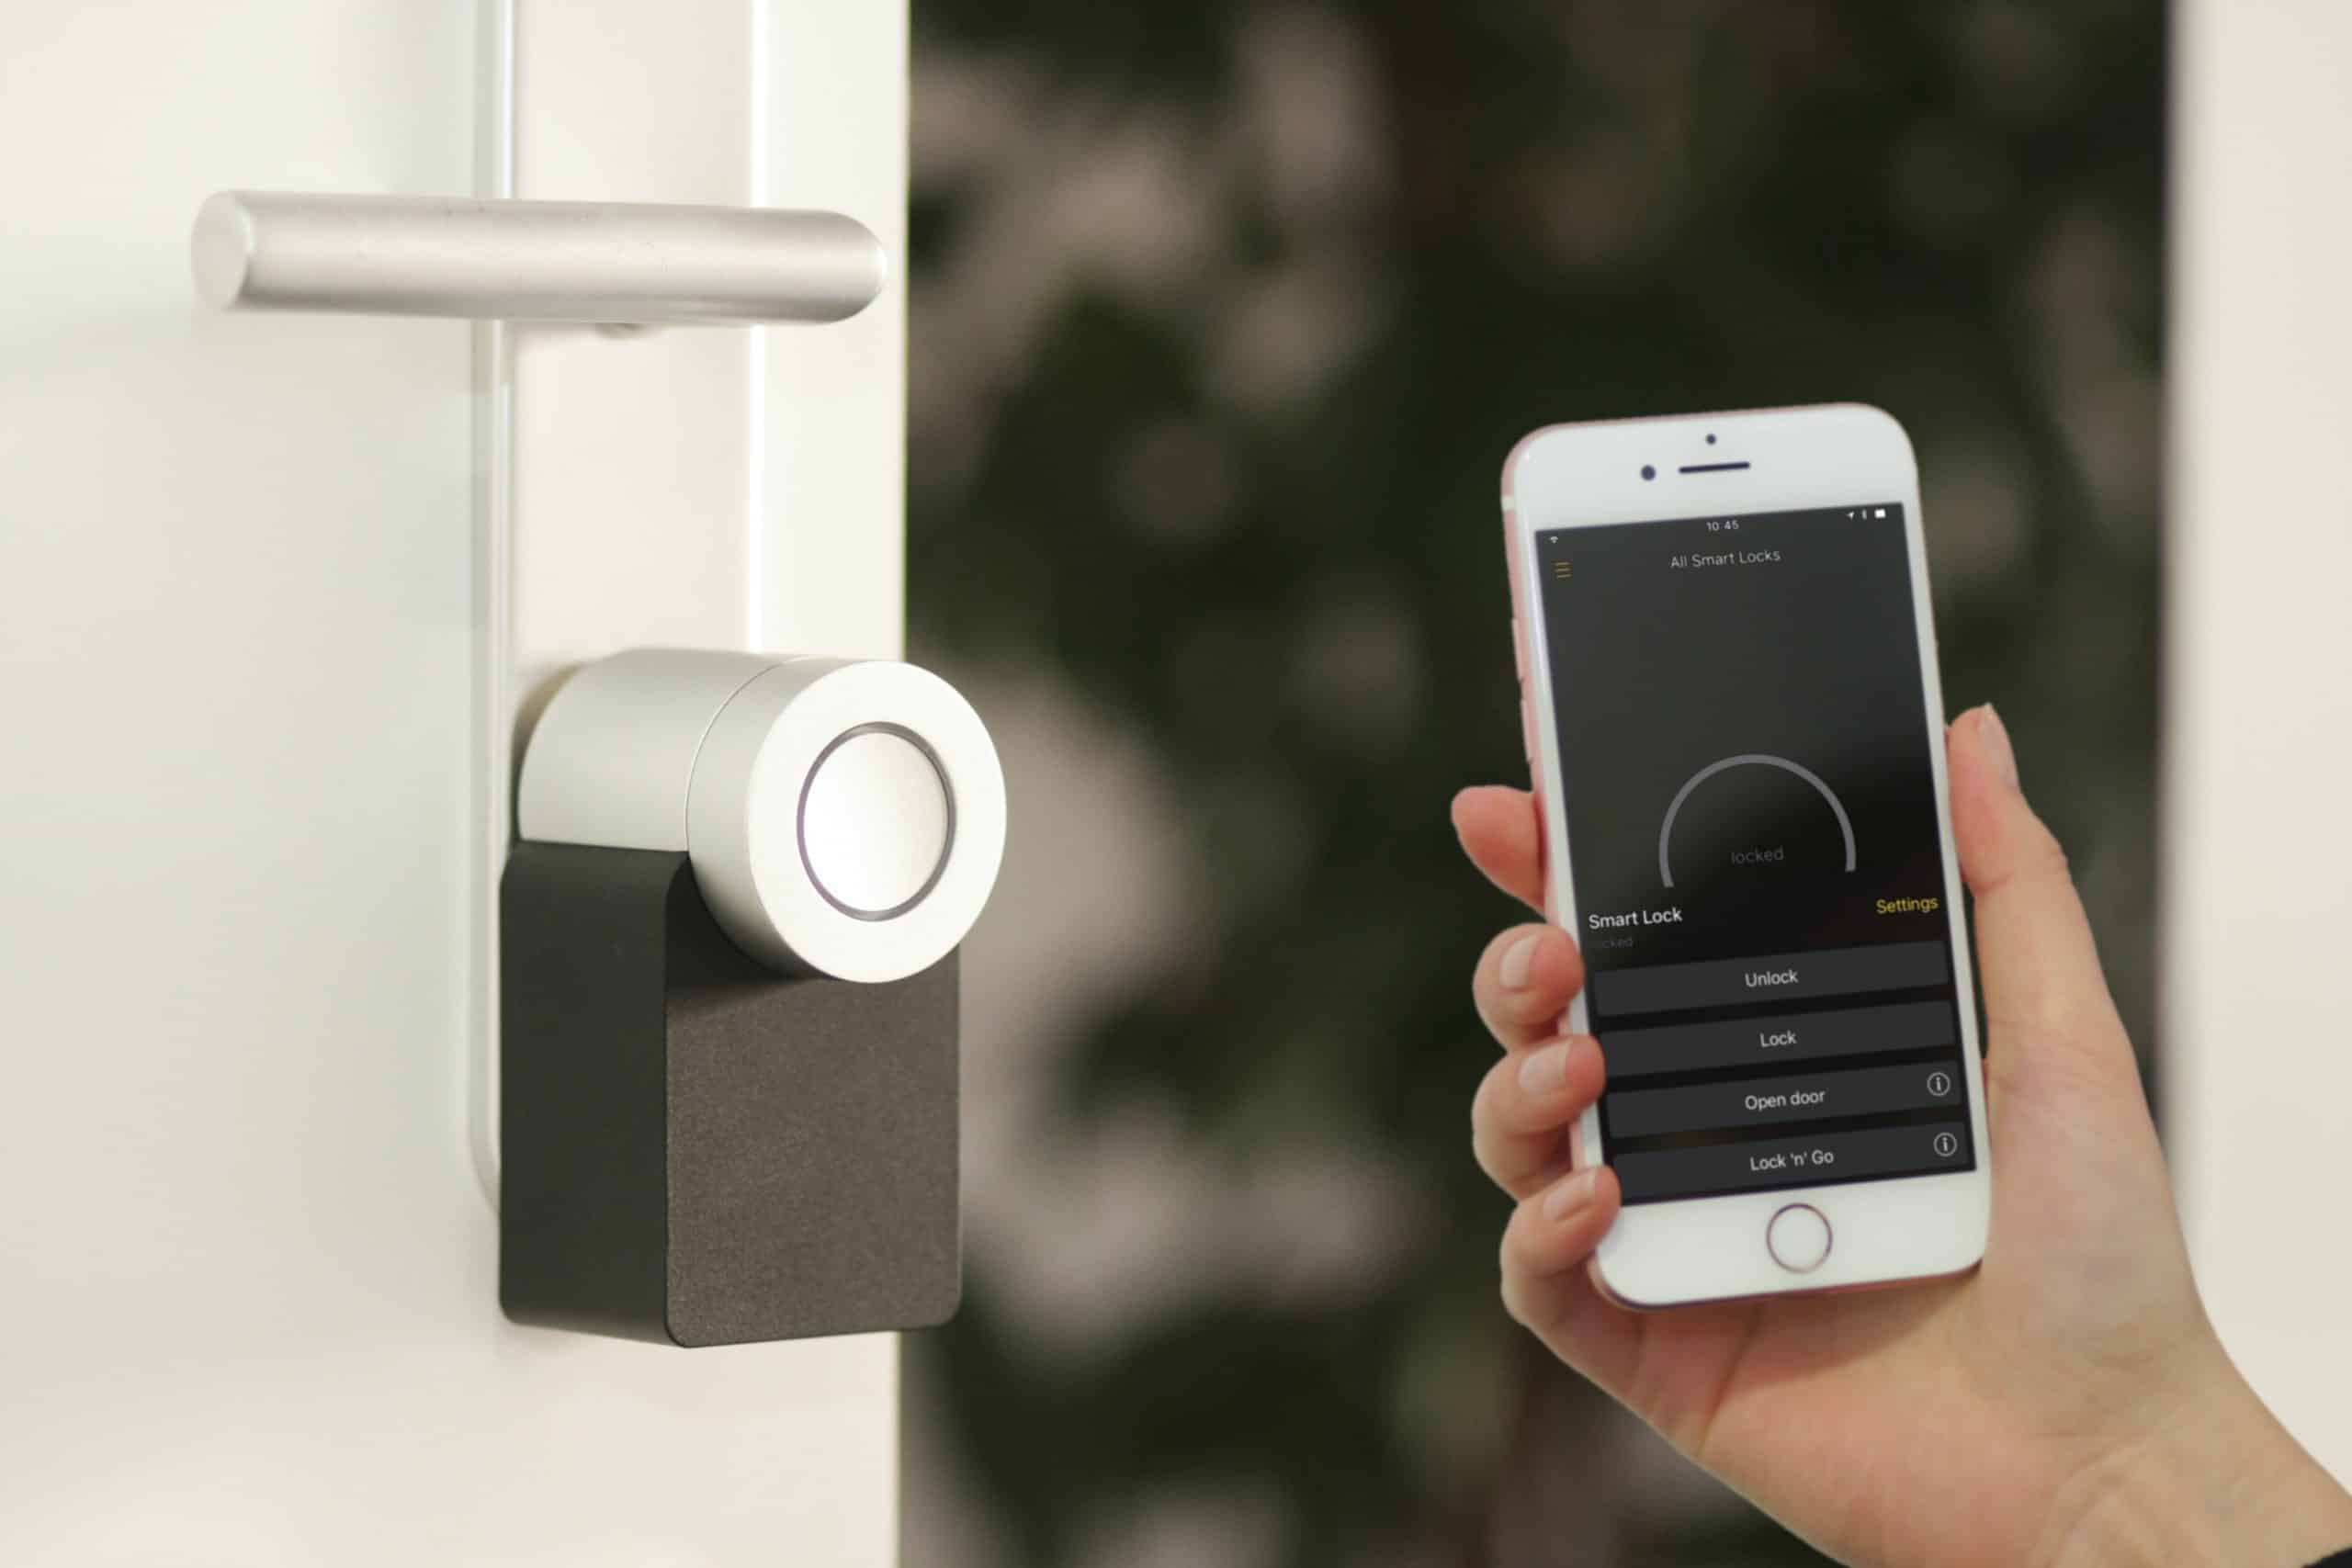 Wireless alarm system. How will it work in an apartment?